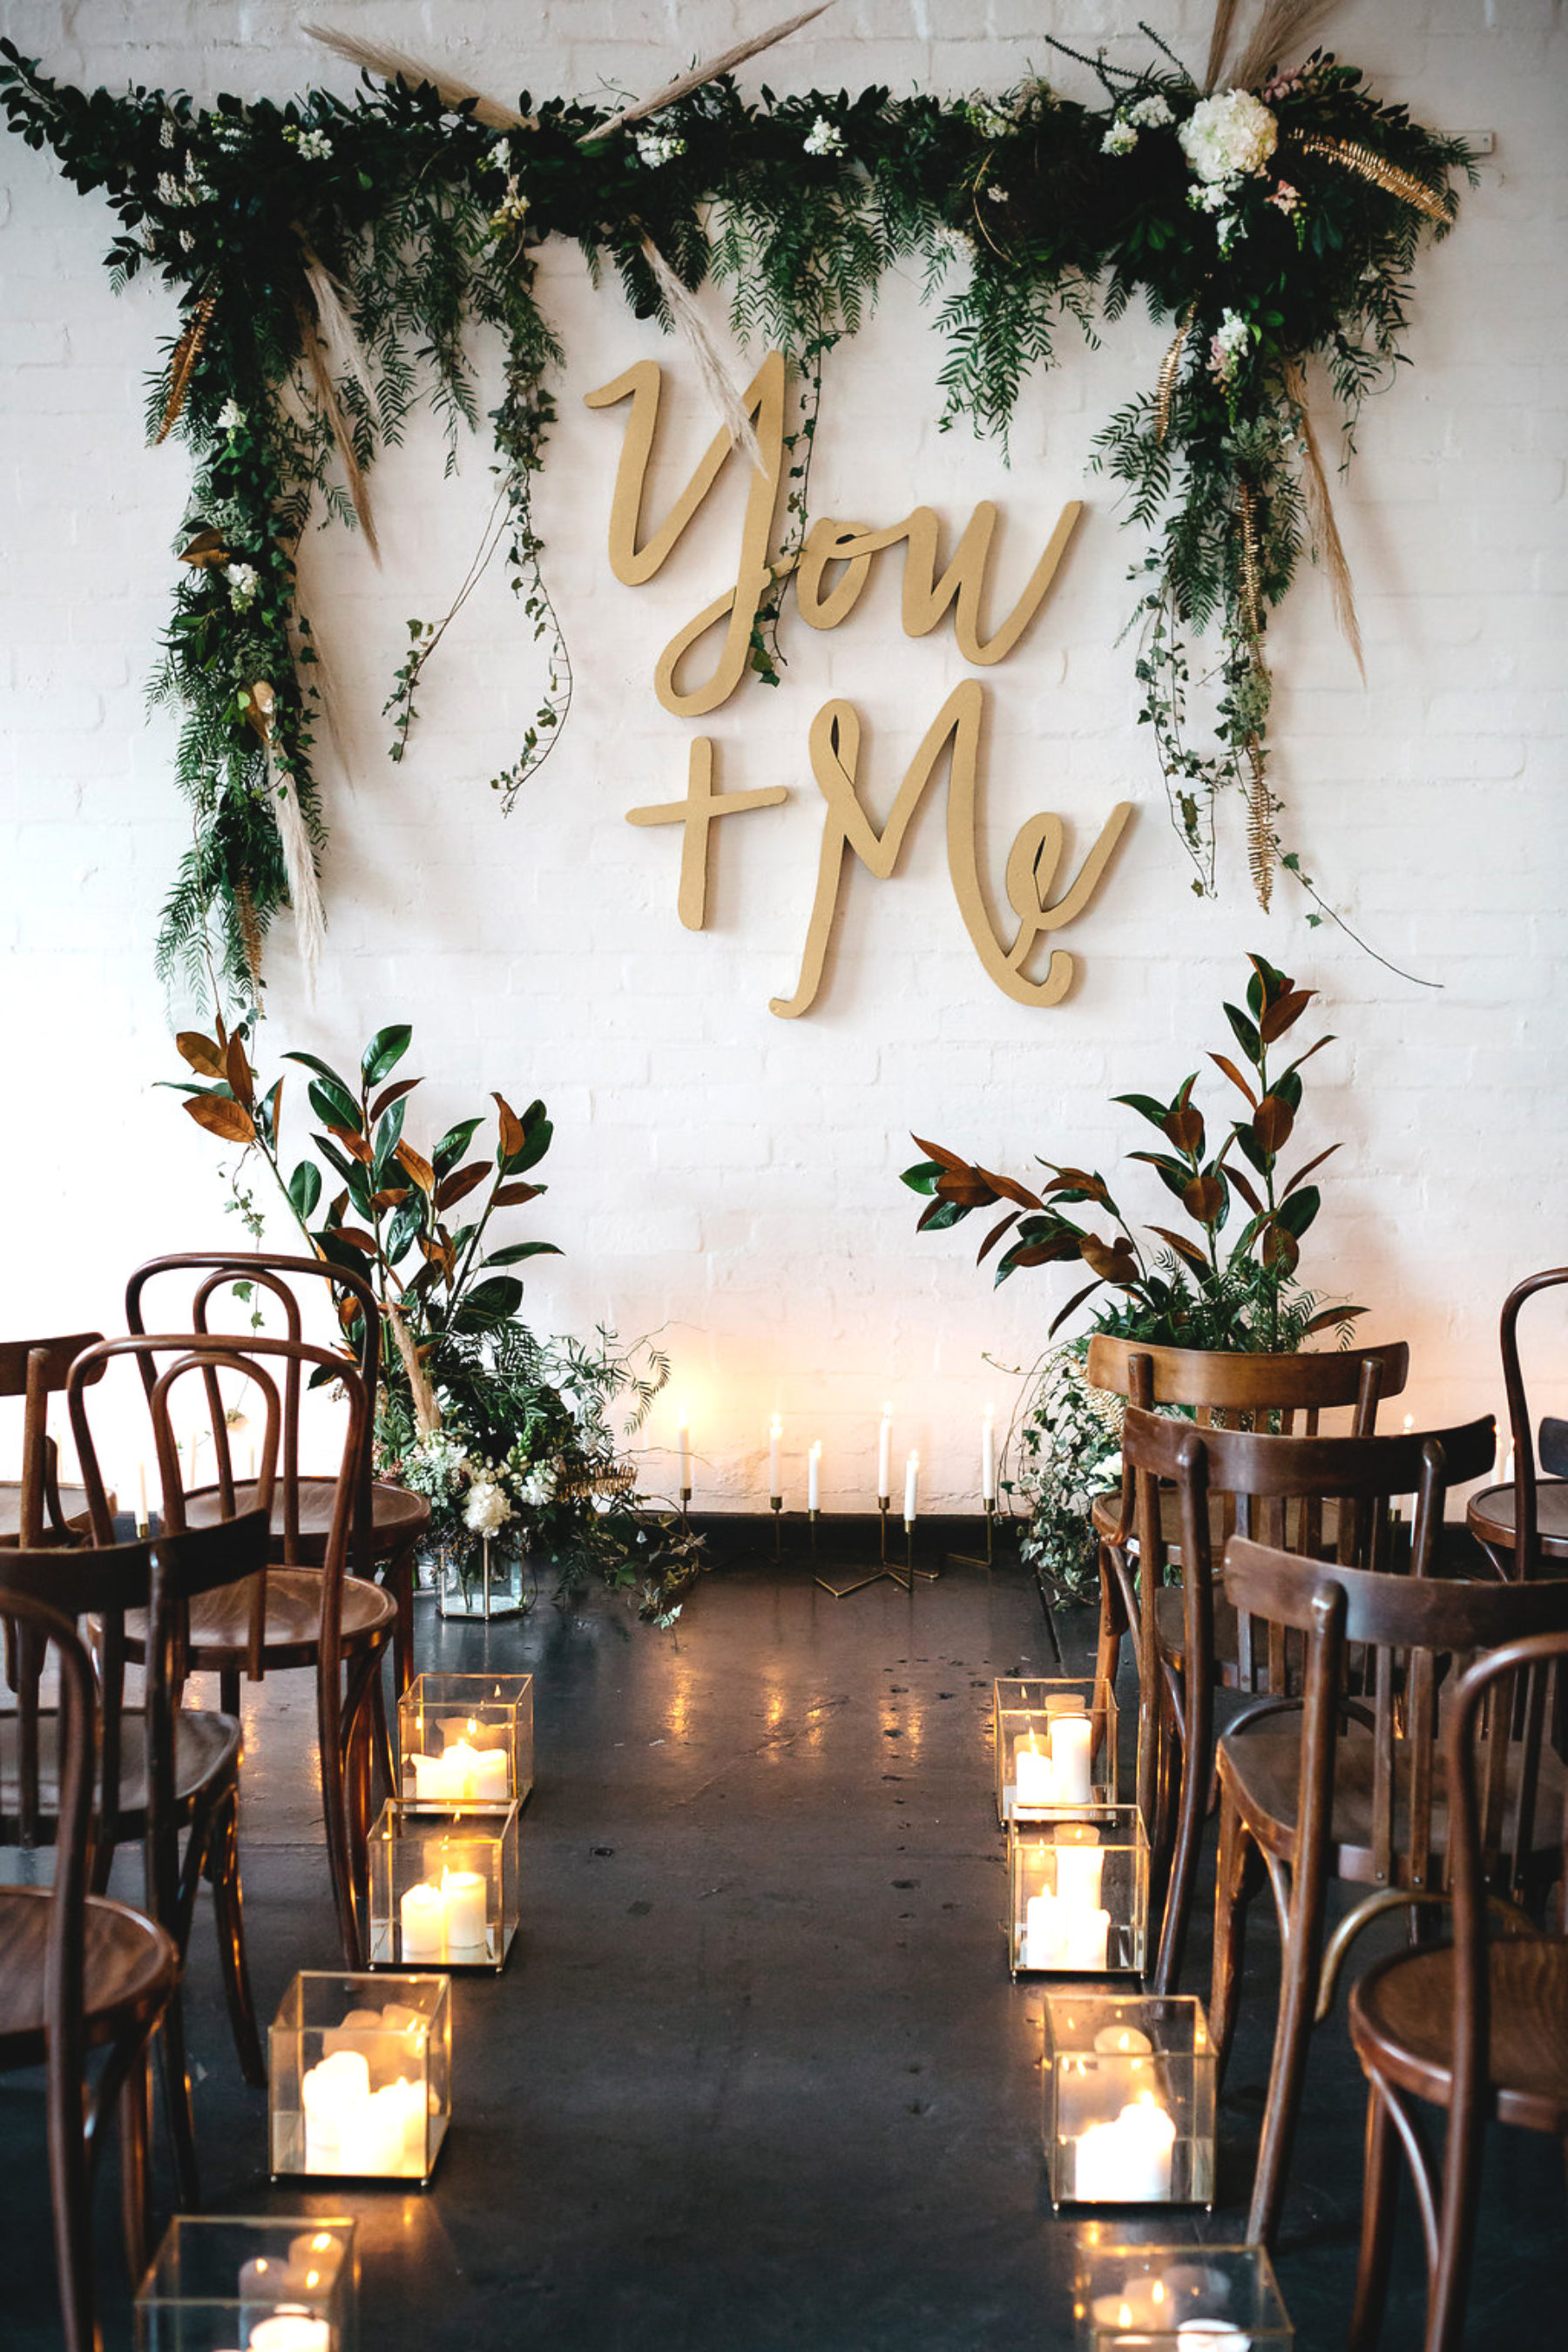 Perfect ceremony decor for a boho wedding style. Love the You and Me backdrop. // ❤ Check Out These Gorgeous 20 Indoor Wedding Ceremony Ideas. // http://mysweetengagement.com/indoor-wedding-ceremony-ideas